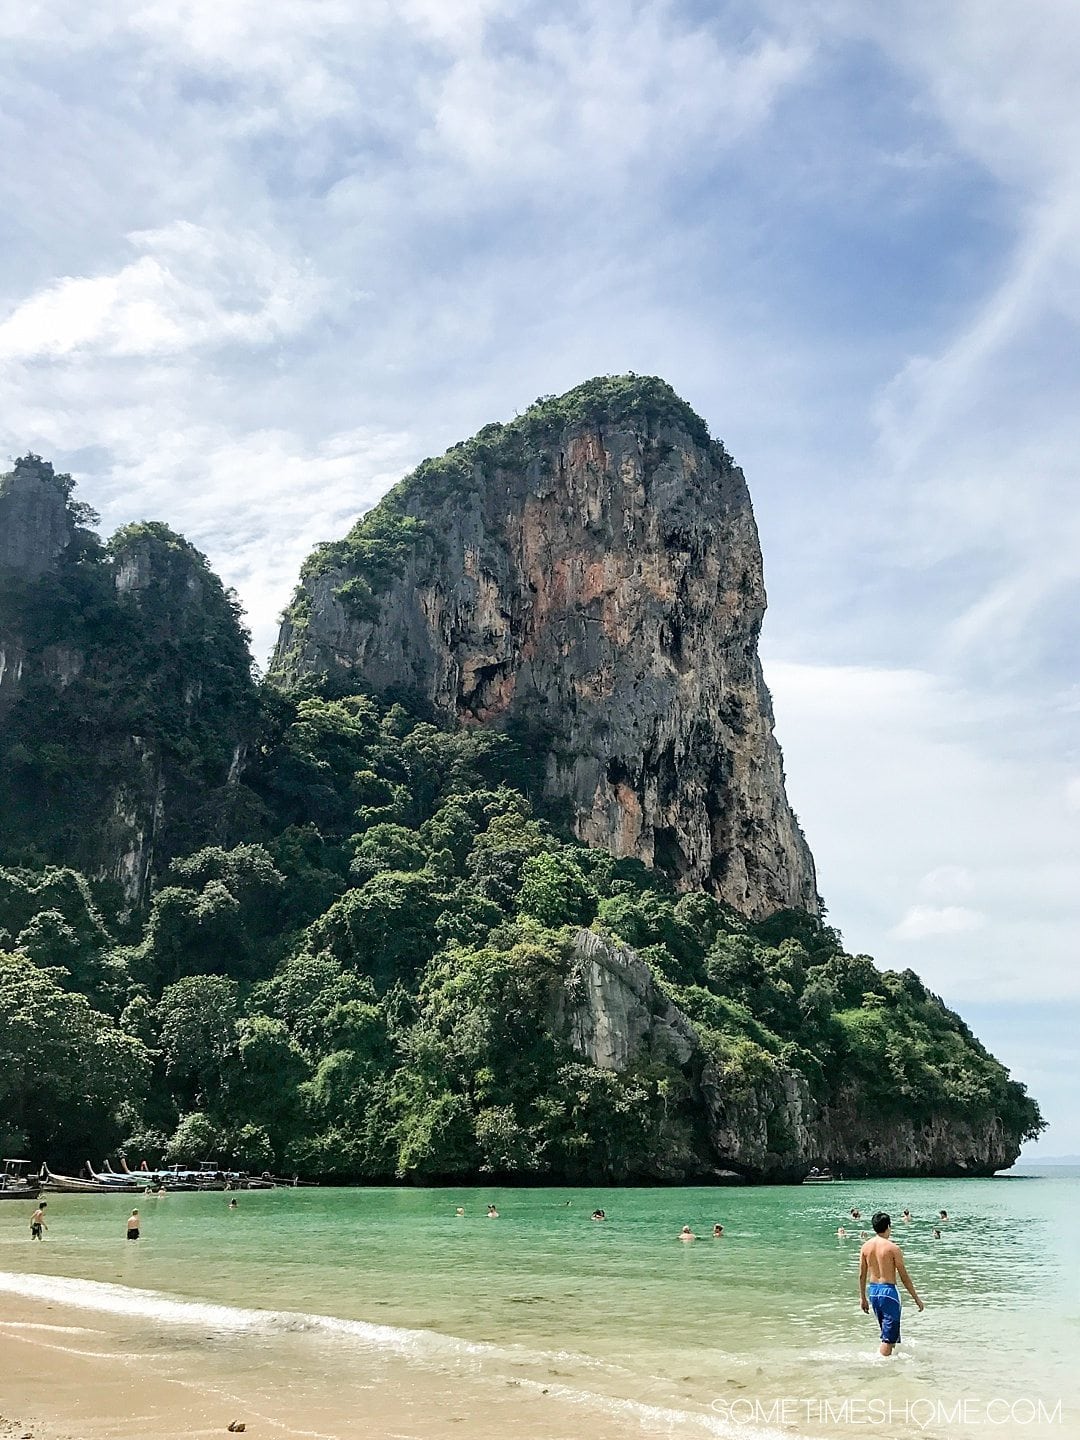 The BEST excursion we did in Thailand was a day rock climbing Phuket with an amazing guide. Our destinations were Krabi and Railay Beach on our day trip itinerary. Our adventure between the islands was a wonderful thing to do on a mid-size budget. Learn about our cost (for solo and couples) and see photography and more on Sometimes Home. #ThailandTravel #PhuketThailand #RailayBeach #KrabiBeach #RockClimbing #ThailandRockClimbing #ThingstodoinPhuket #ThaiBeaches #SoutheastAsiaTrip #RockClimbingThailand